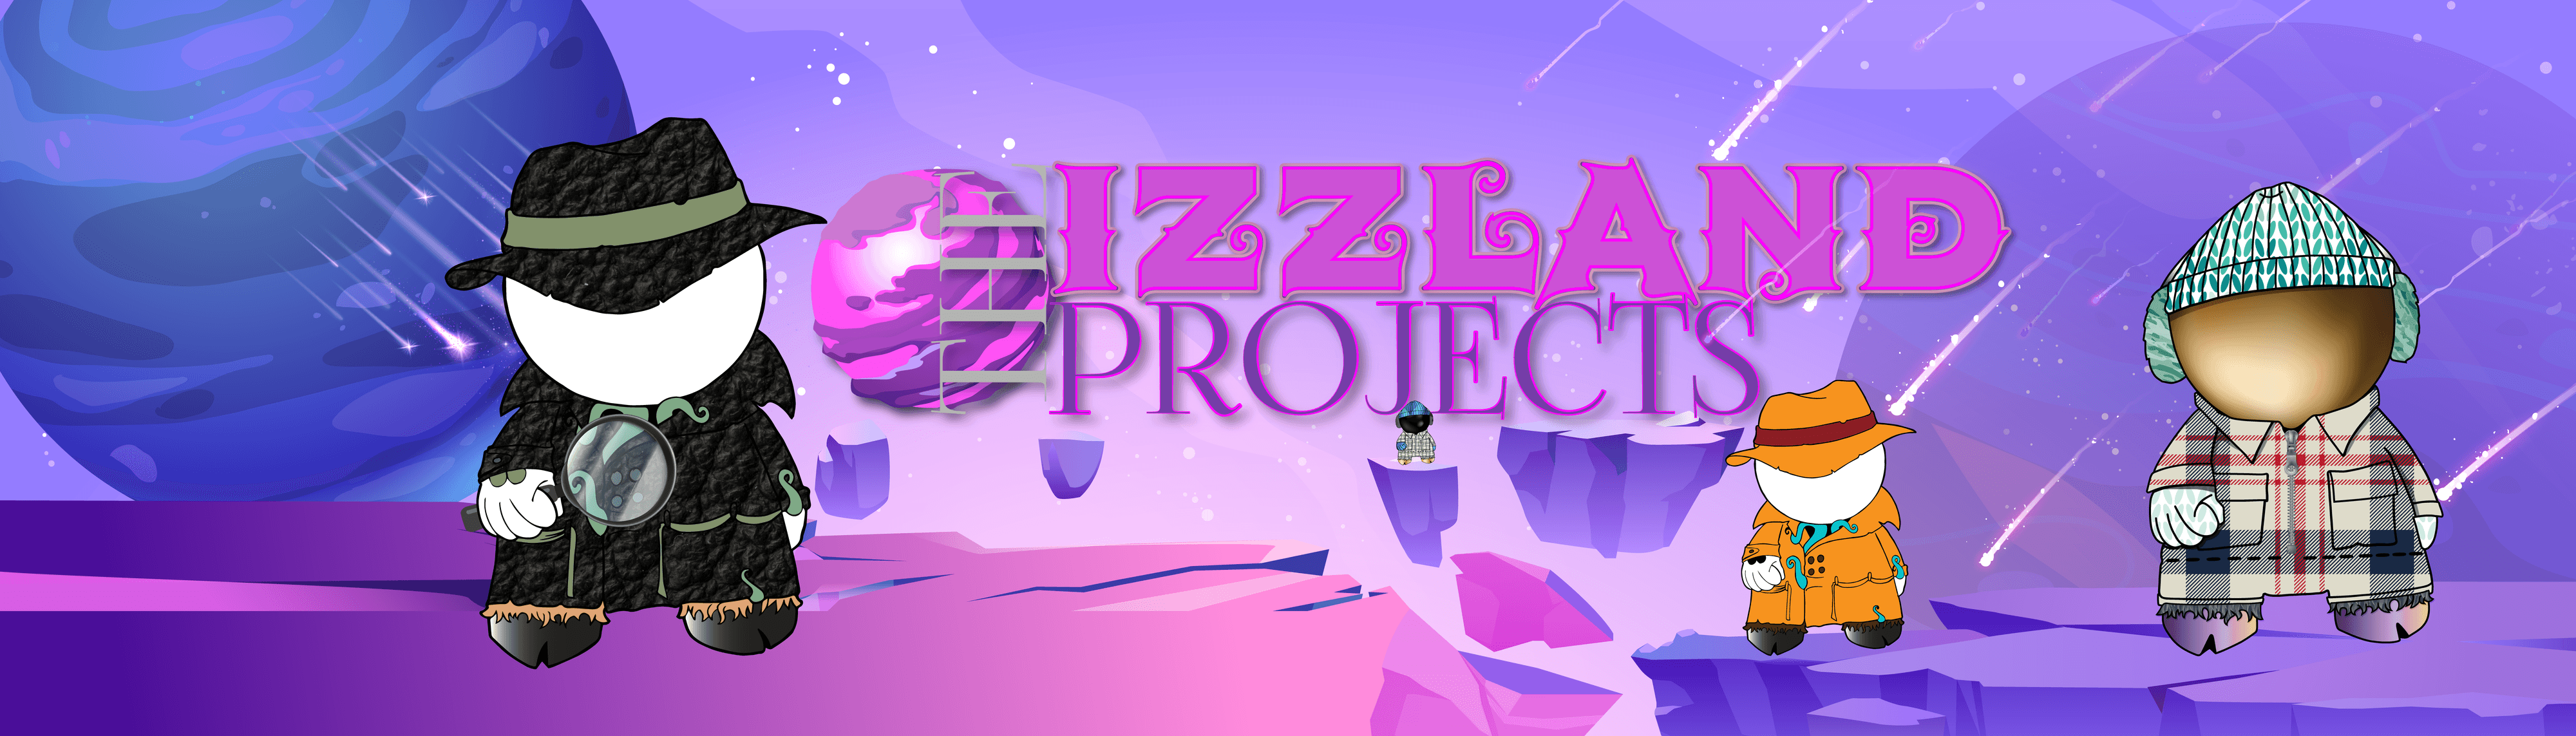 The-Izzland-Projects banner